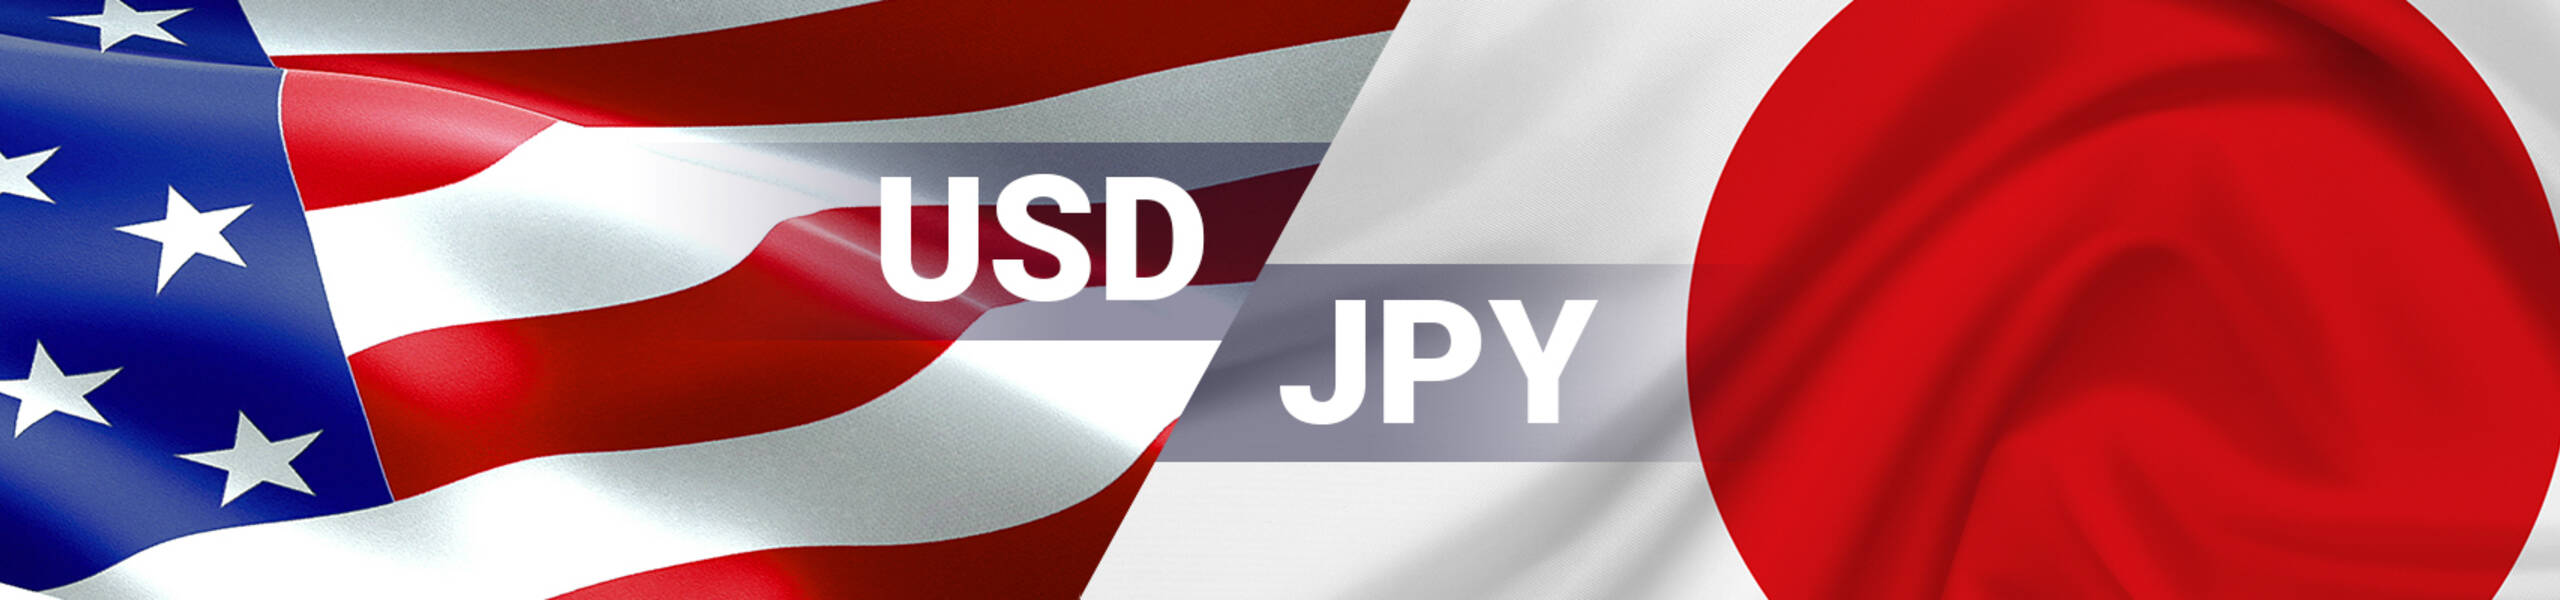 USD/JPY: dollar rose to Cloud